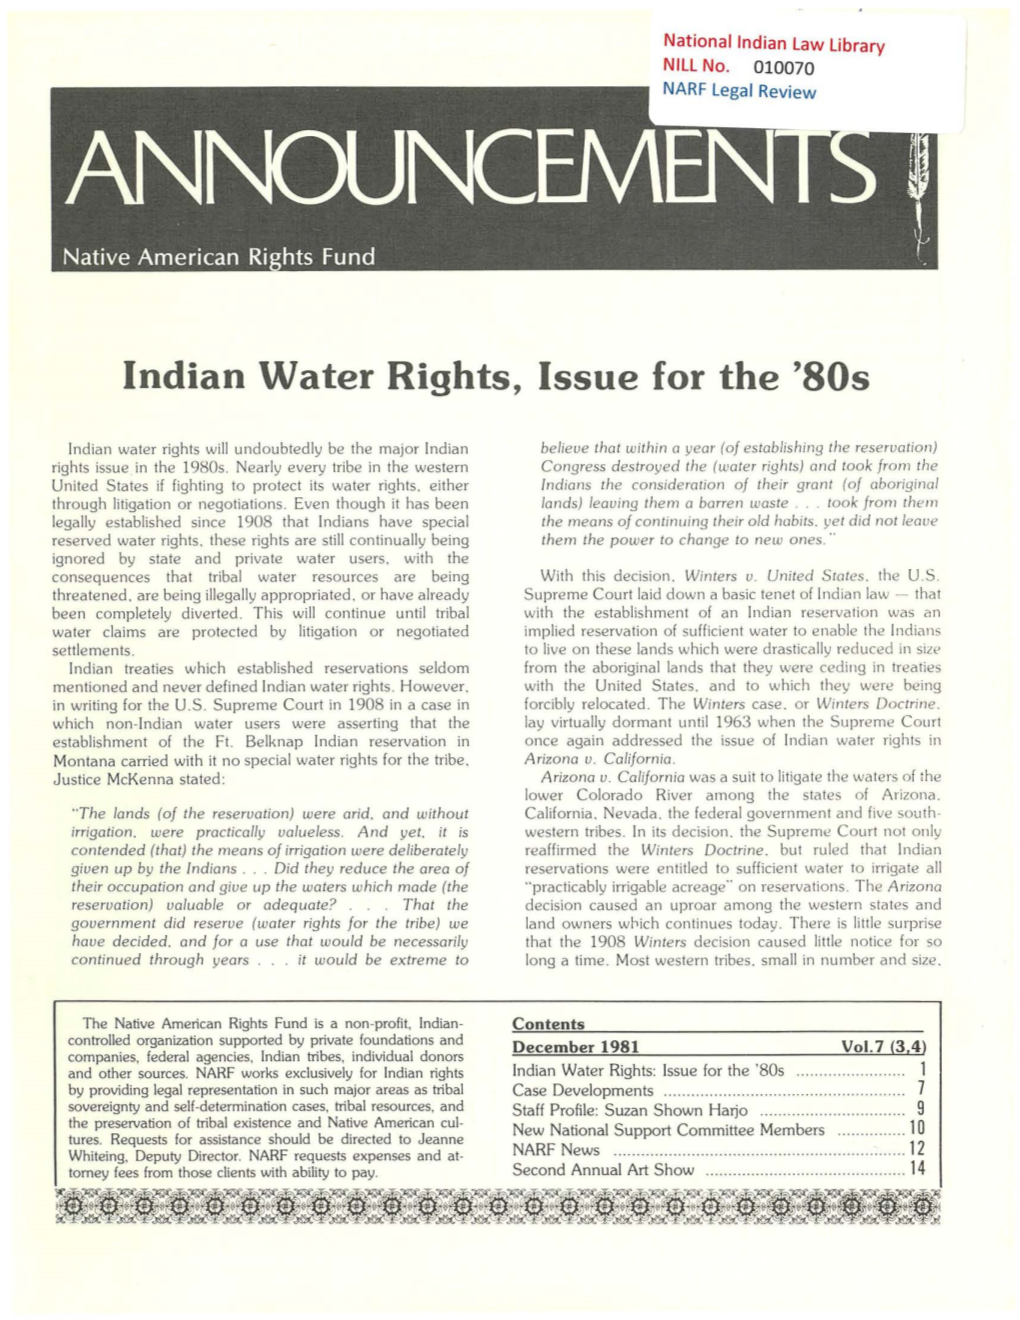 Indian Water Rights, Issue for the '80S